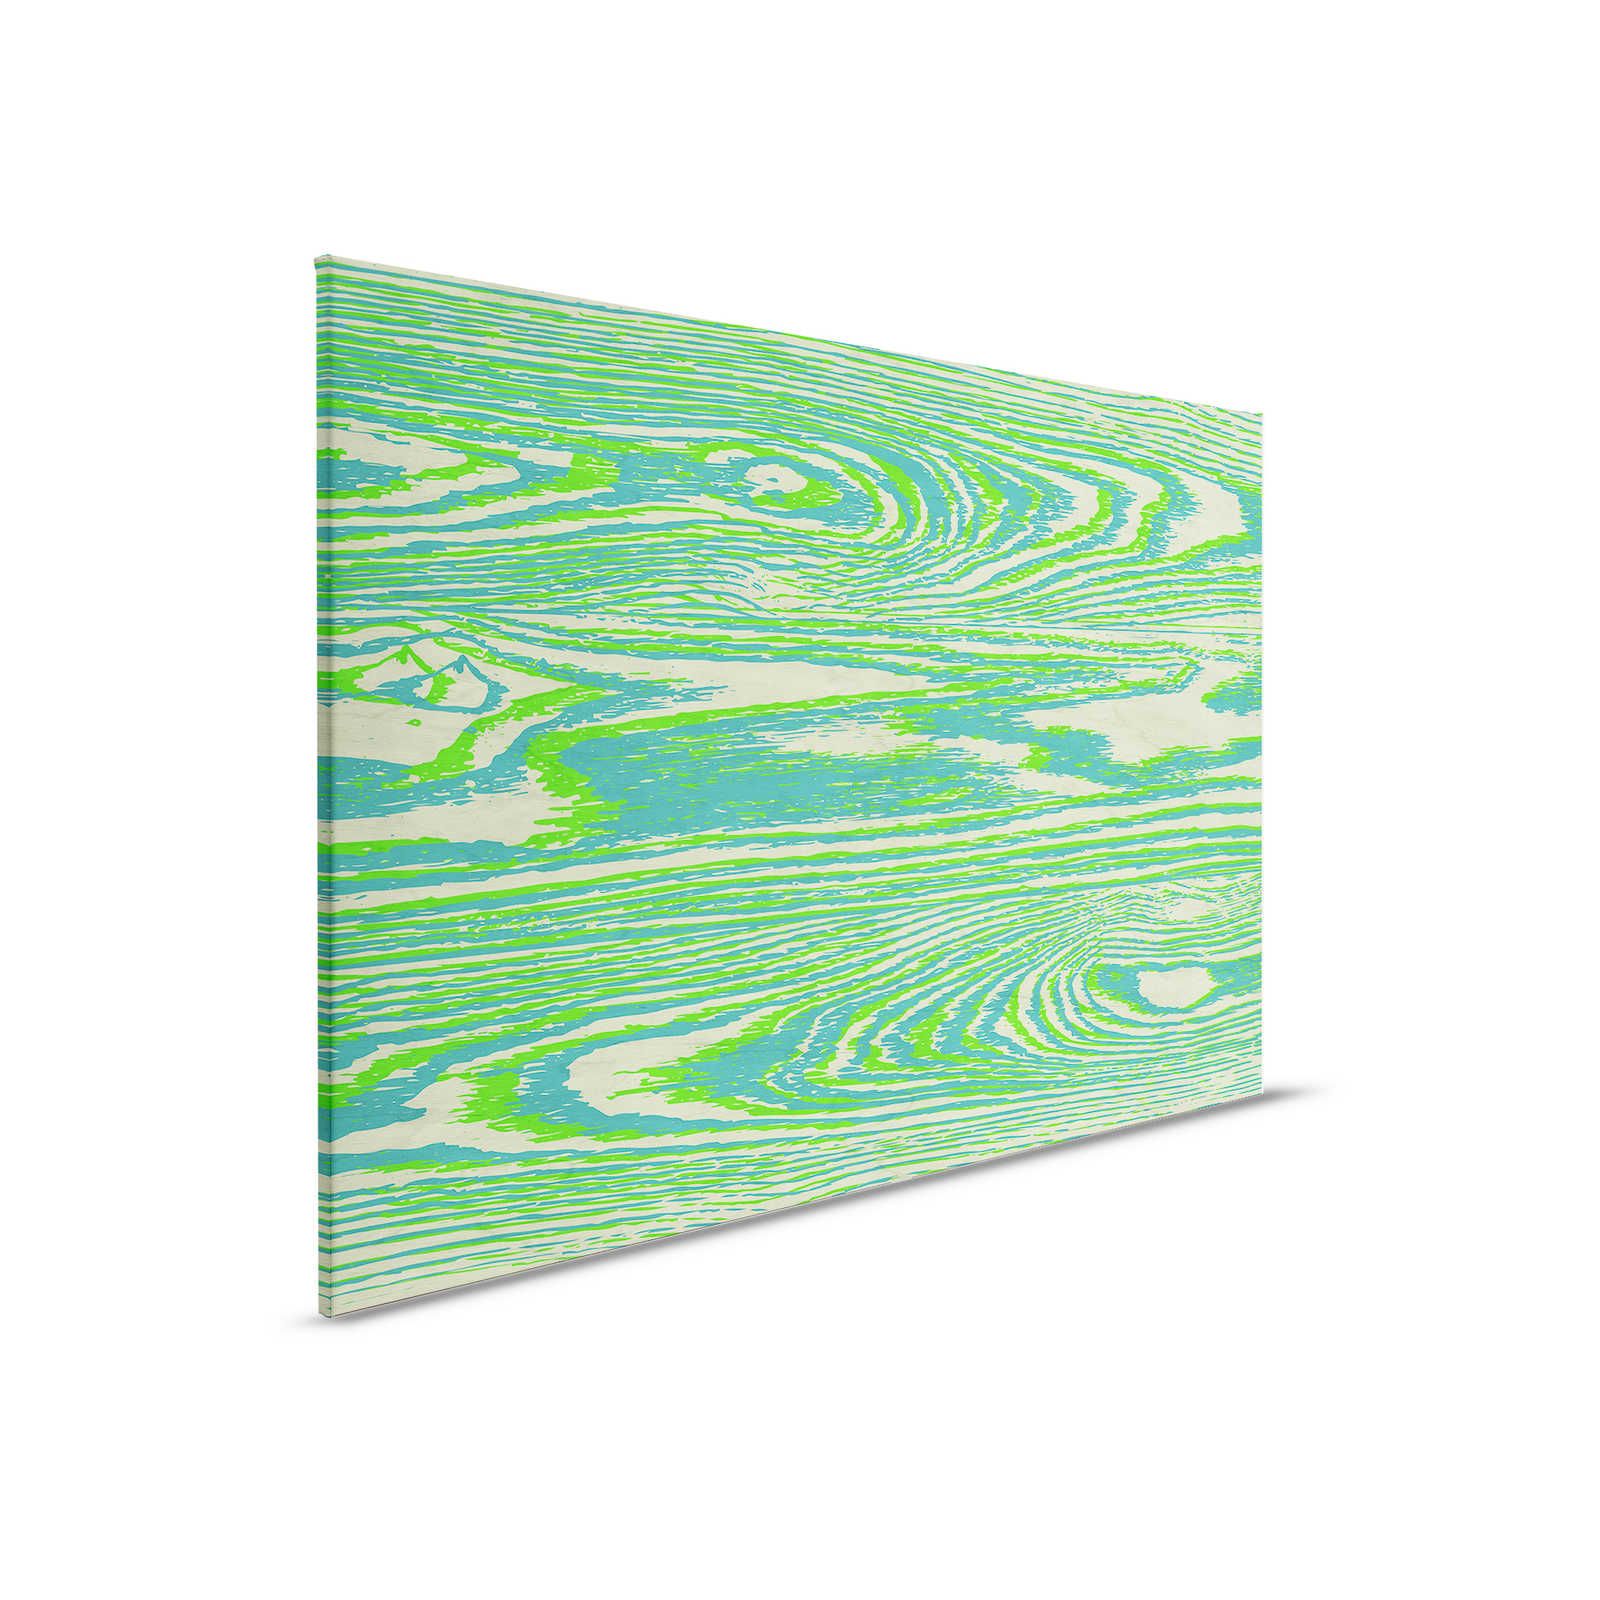         Bounty 1 - Neon Green Canvas Painting Wood Look Design - 0.90 m x 0.60 m
    